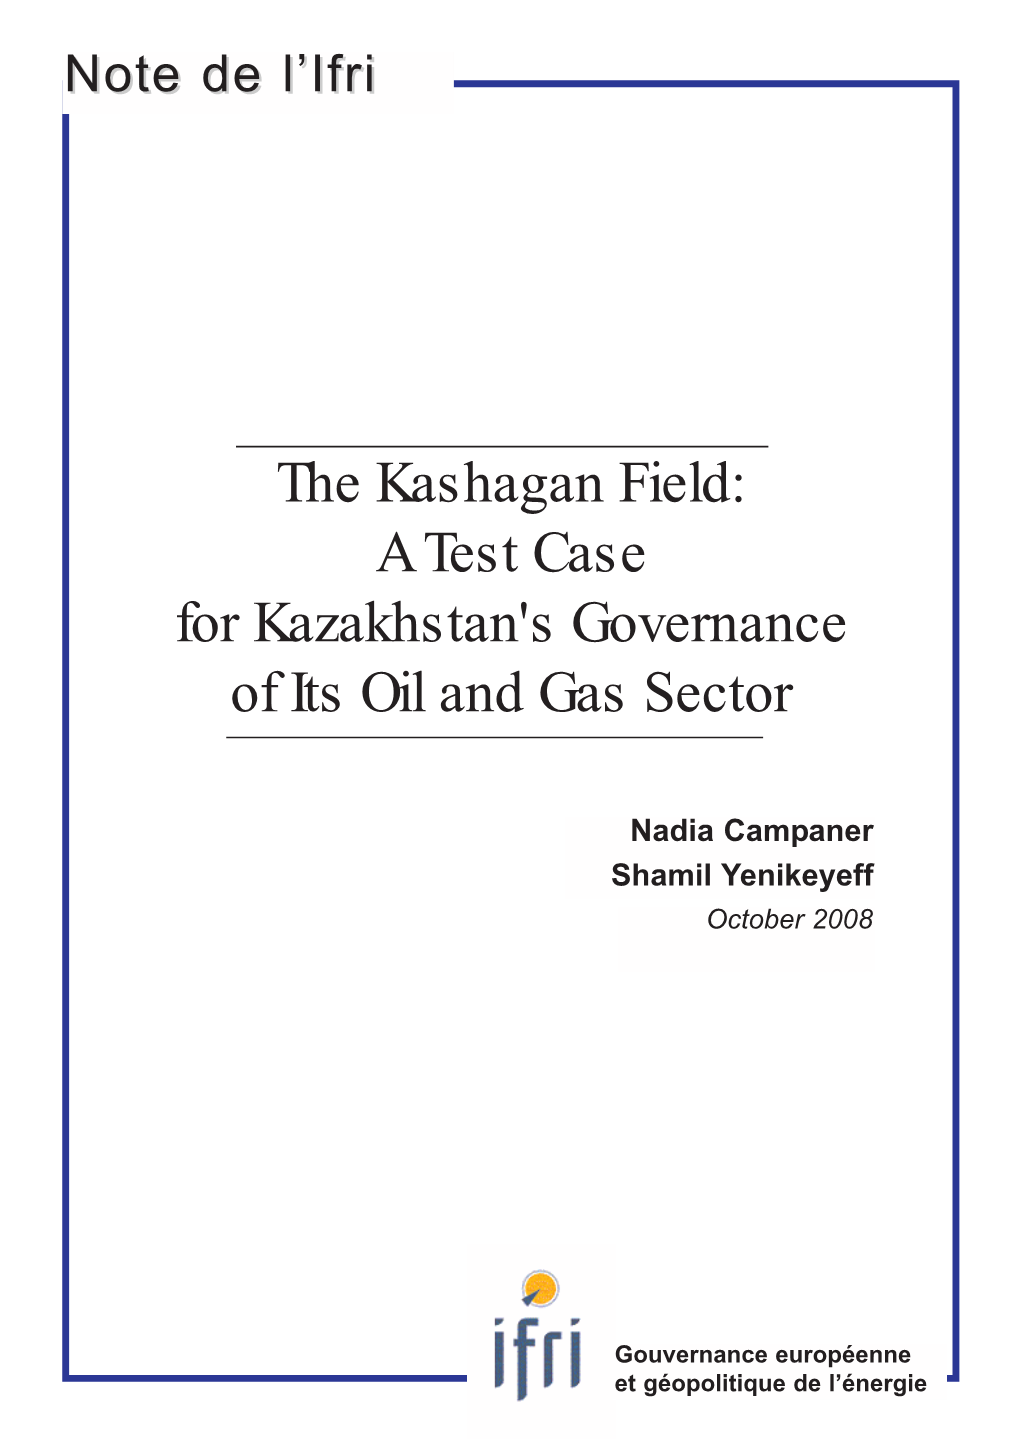 The Kashagan Field: a Test Case for Kazakhstan's Governance of Its Oil and Gas Sector